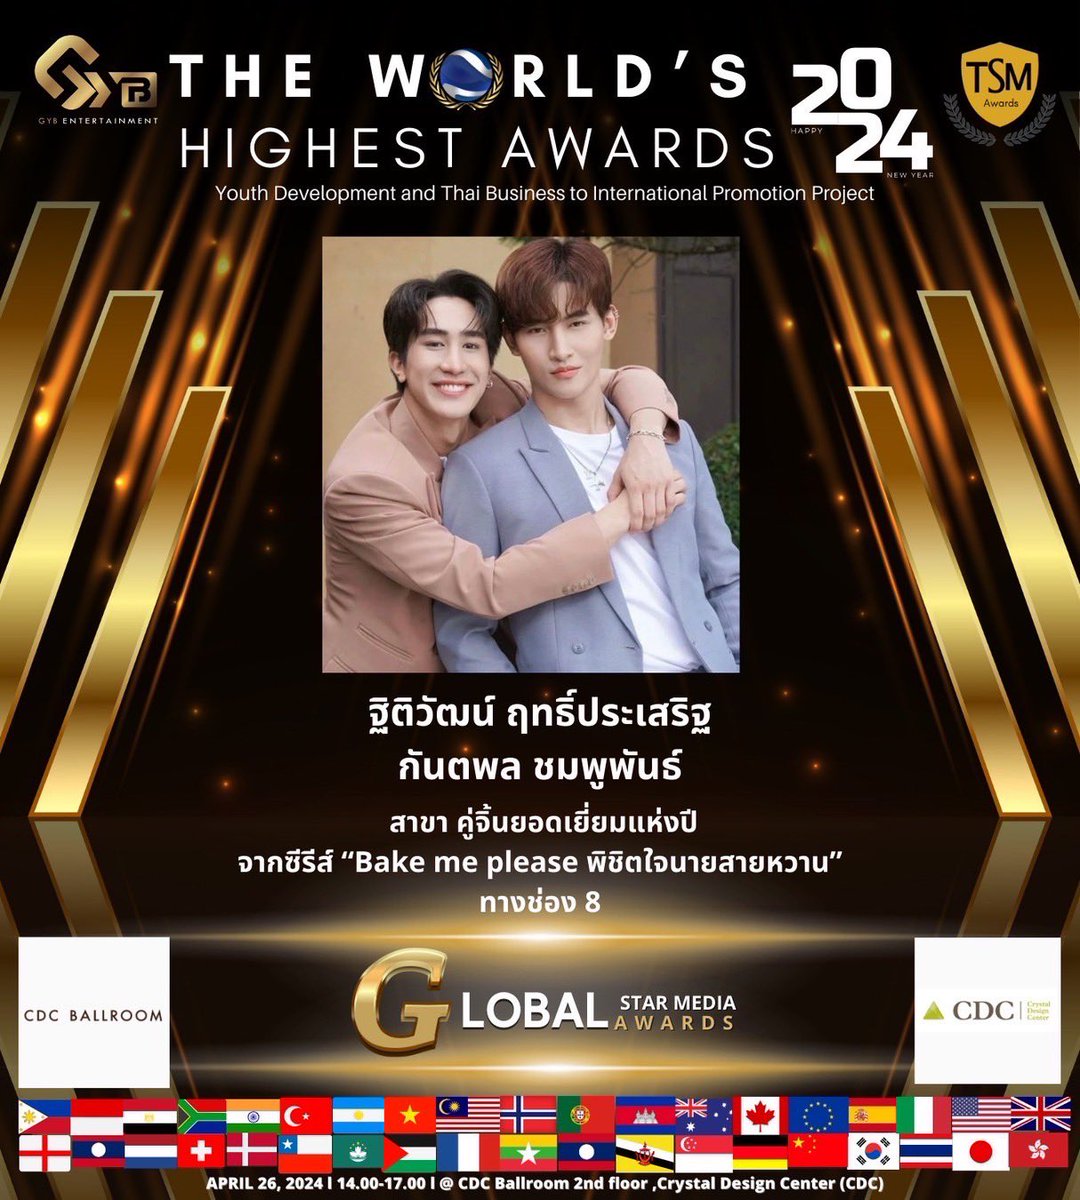 Congratulations on the award. Well deserved. The series is very nice and the interpretation of the main couple is excellent.
#OhmThitiwat #โอห์มไง
#GlobalStarMediaAwards 
#Bakemepleasetheseries 
#GuideKantapon